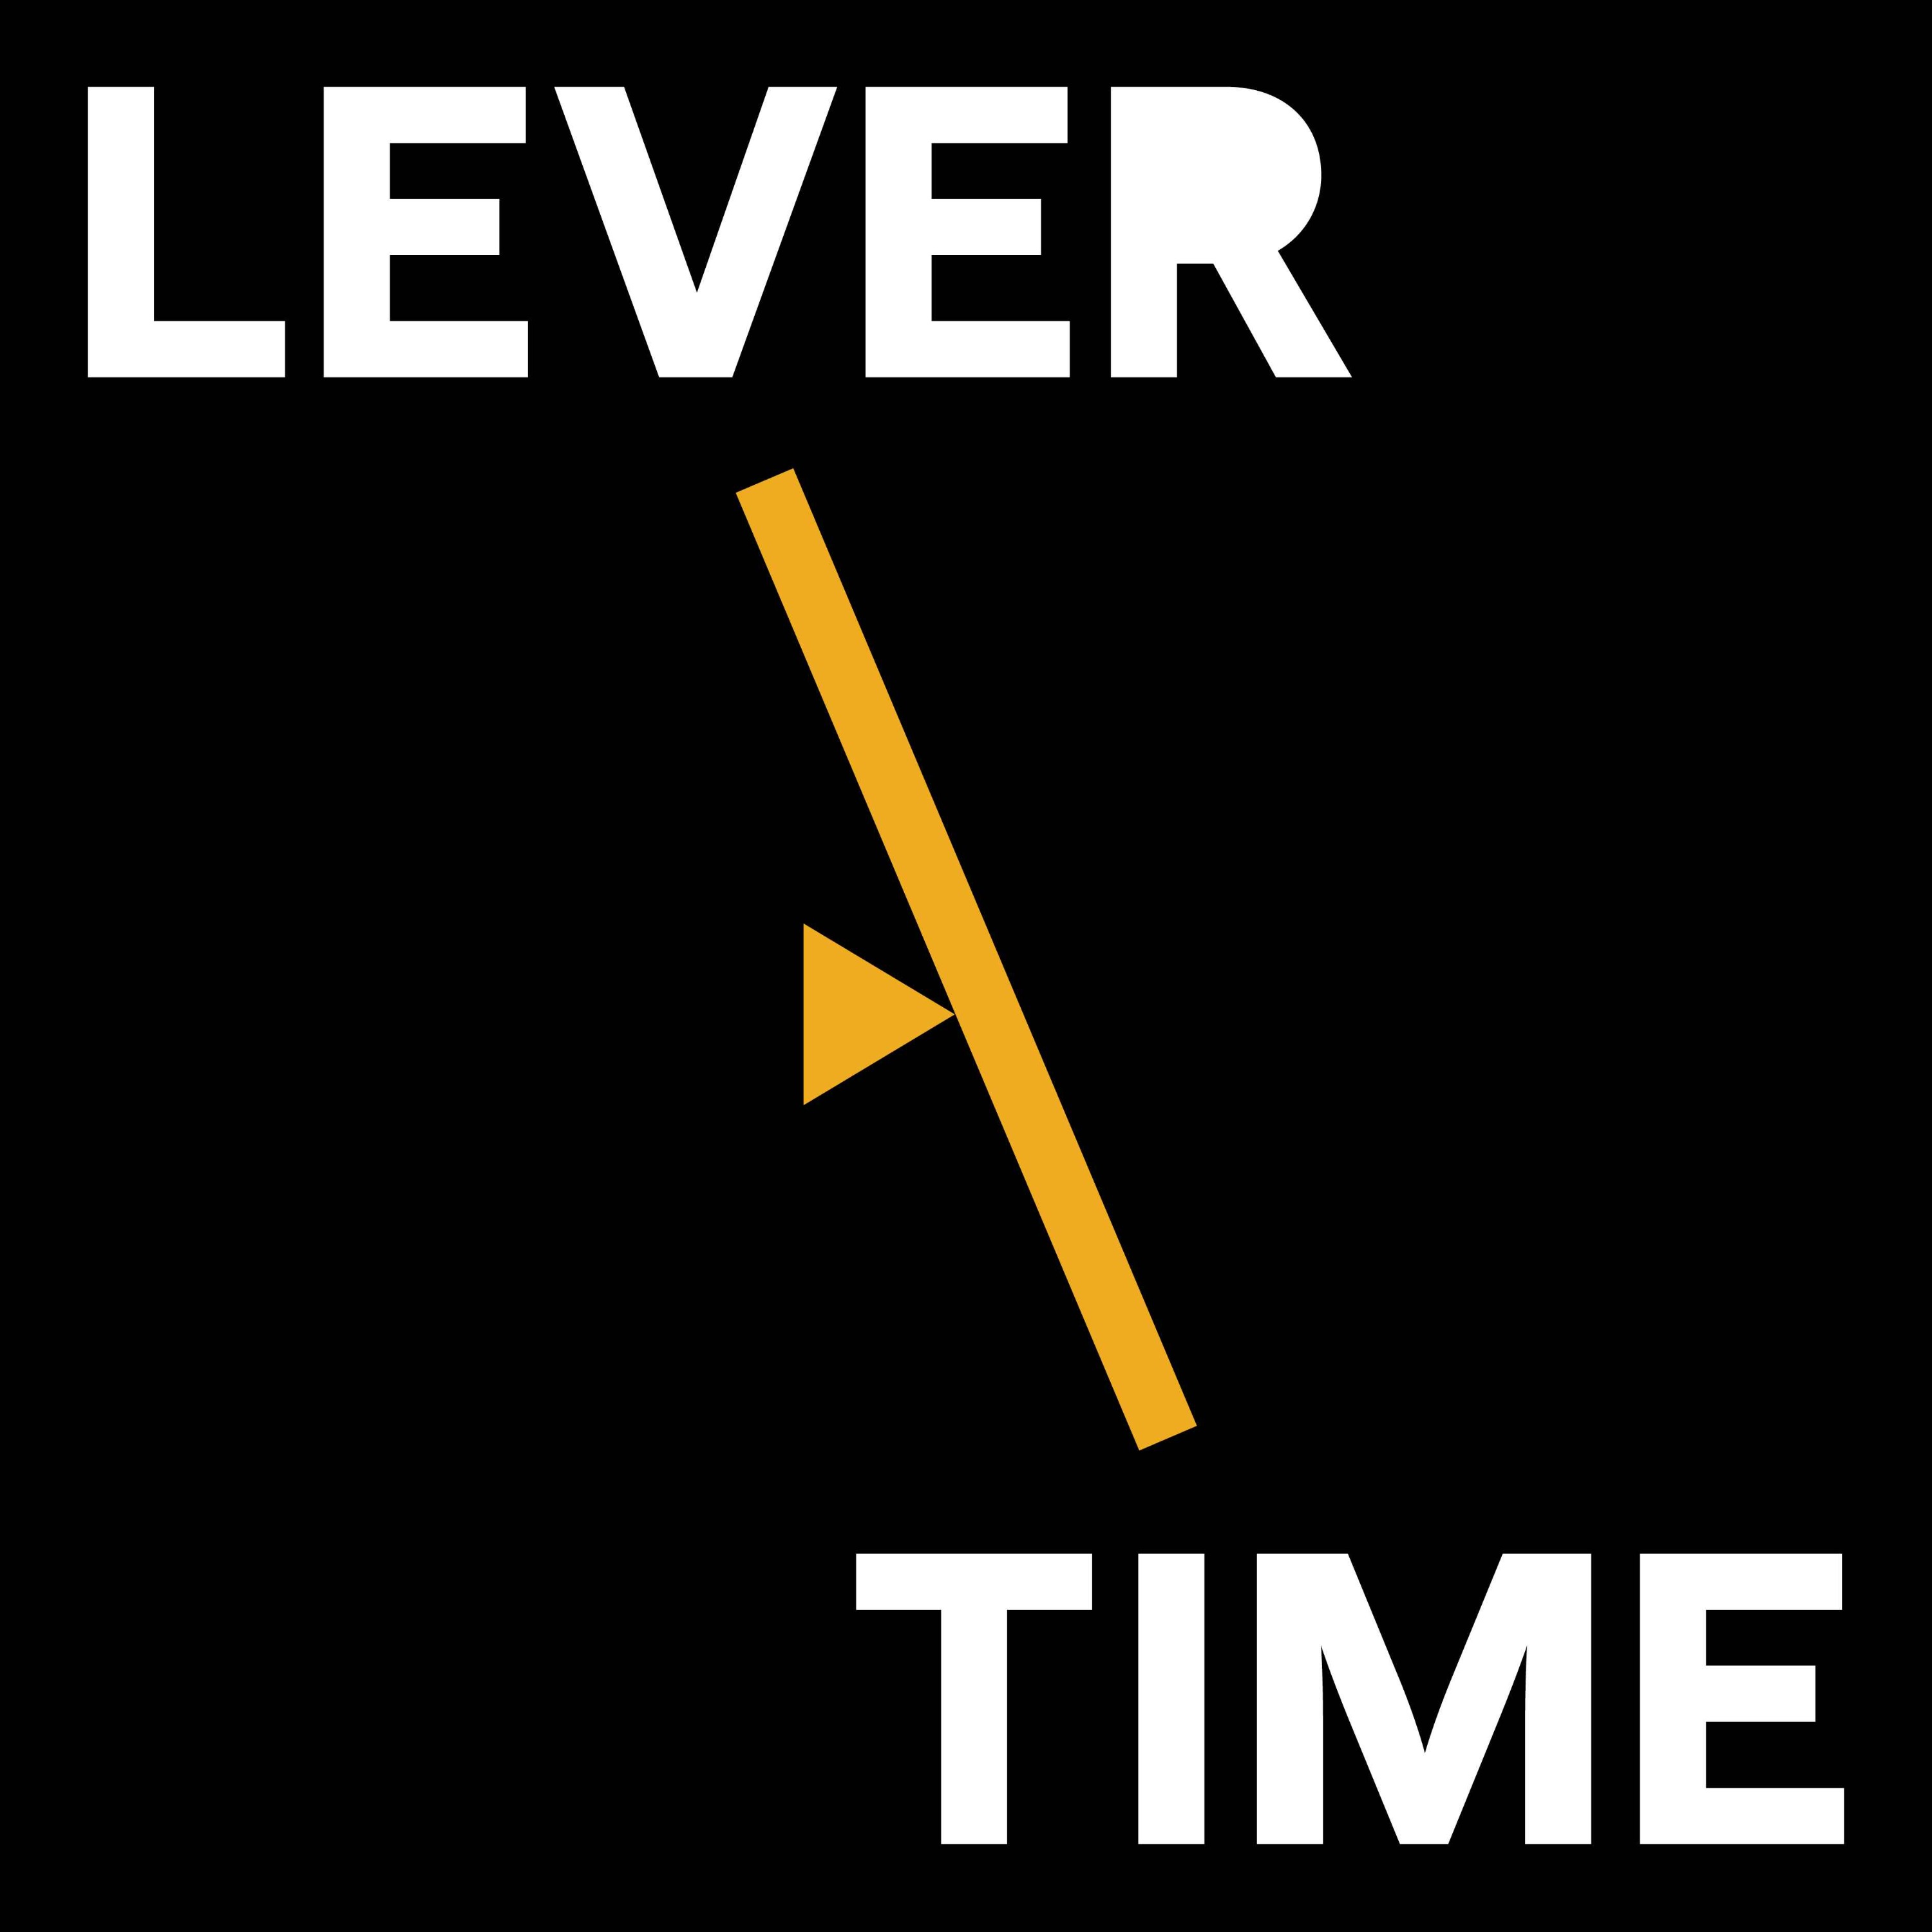 ”Lever Time”: Dissent Will Not Be Tolerated in the Democratic Party